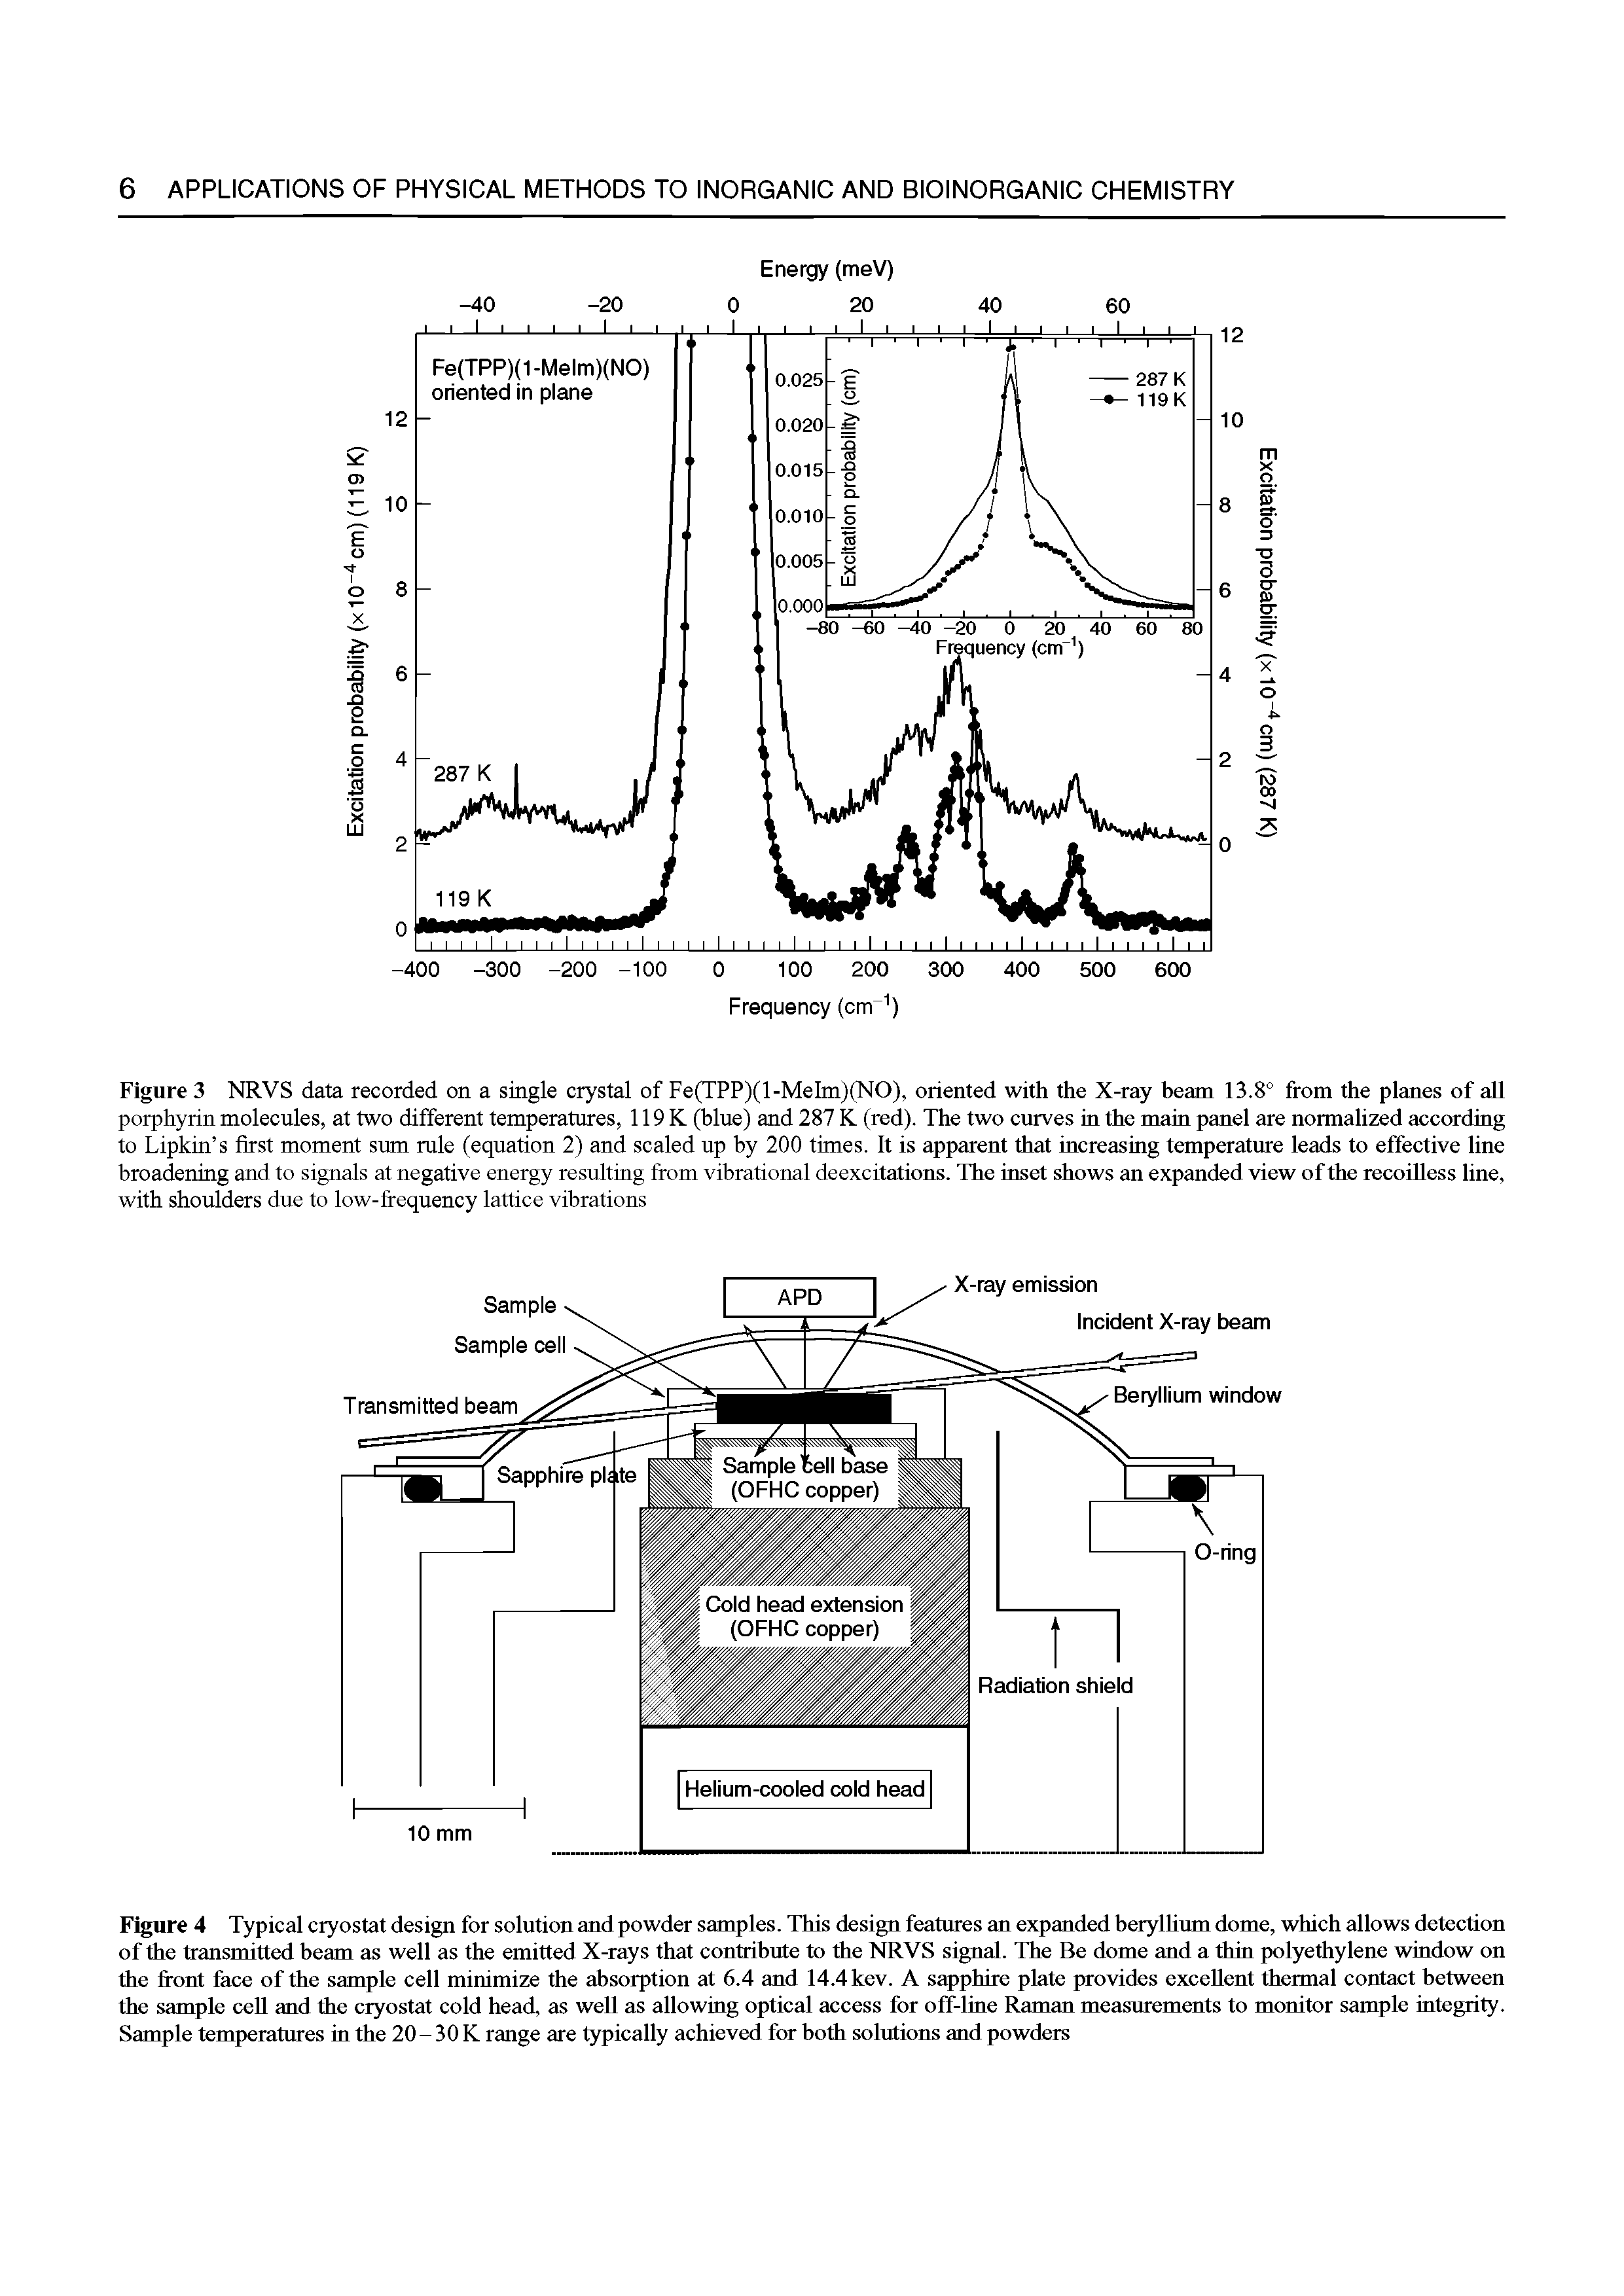 Figure 4 Typical cryostat design for solution and powder samples. This design features an expanded berylhiun dome, which allows detection of the transmitted beam as well as the emitted X-rays that contribute to the NRVS signal. The Be dome and a thin polyethylene window on the front face of the sample cell minimize the absorption at 6.4 and 14.4 kev. A sapphire plate provides excellent thermal contact between the sample cell and the cryostat cold head, as well as allowing optical access for off-line Raman measurements to monitor sample integrity. Sample temperatures in the 20 - 30 K range are typically achieved for both solutions and powders...